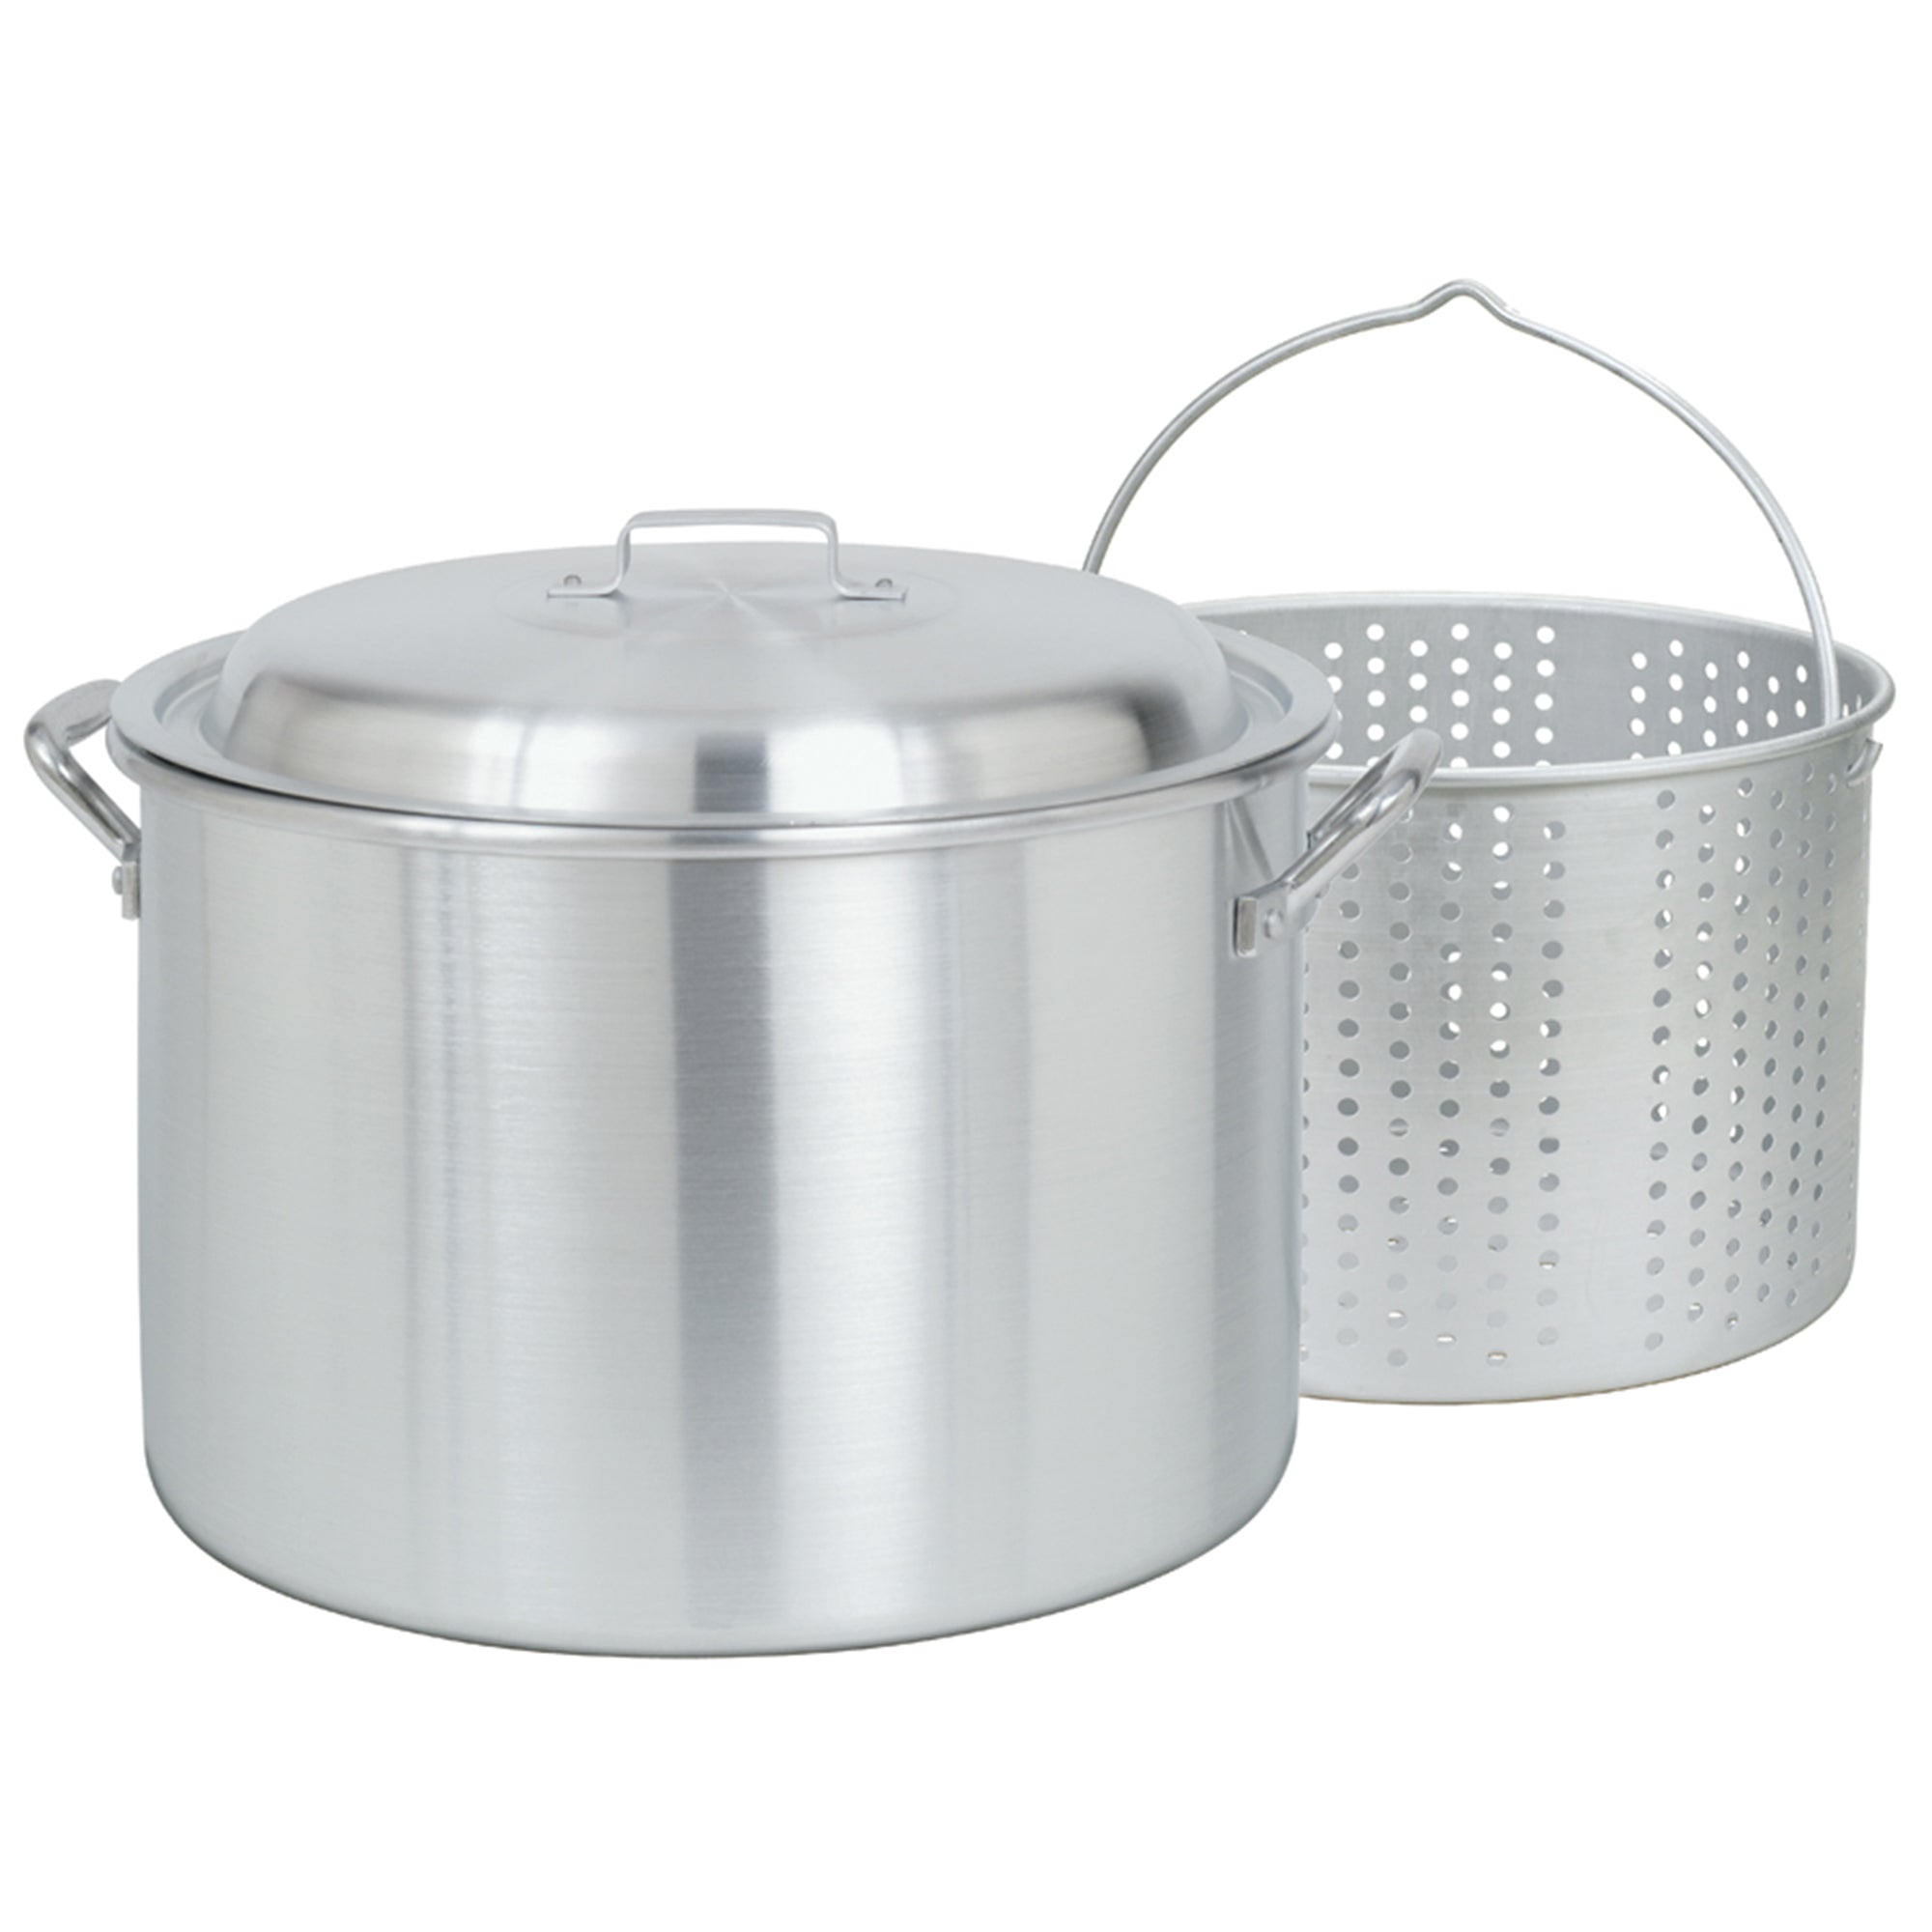 20-qt Aluminum Stockpot with Basket ~ a handcrafted classic